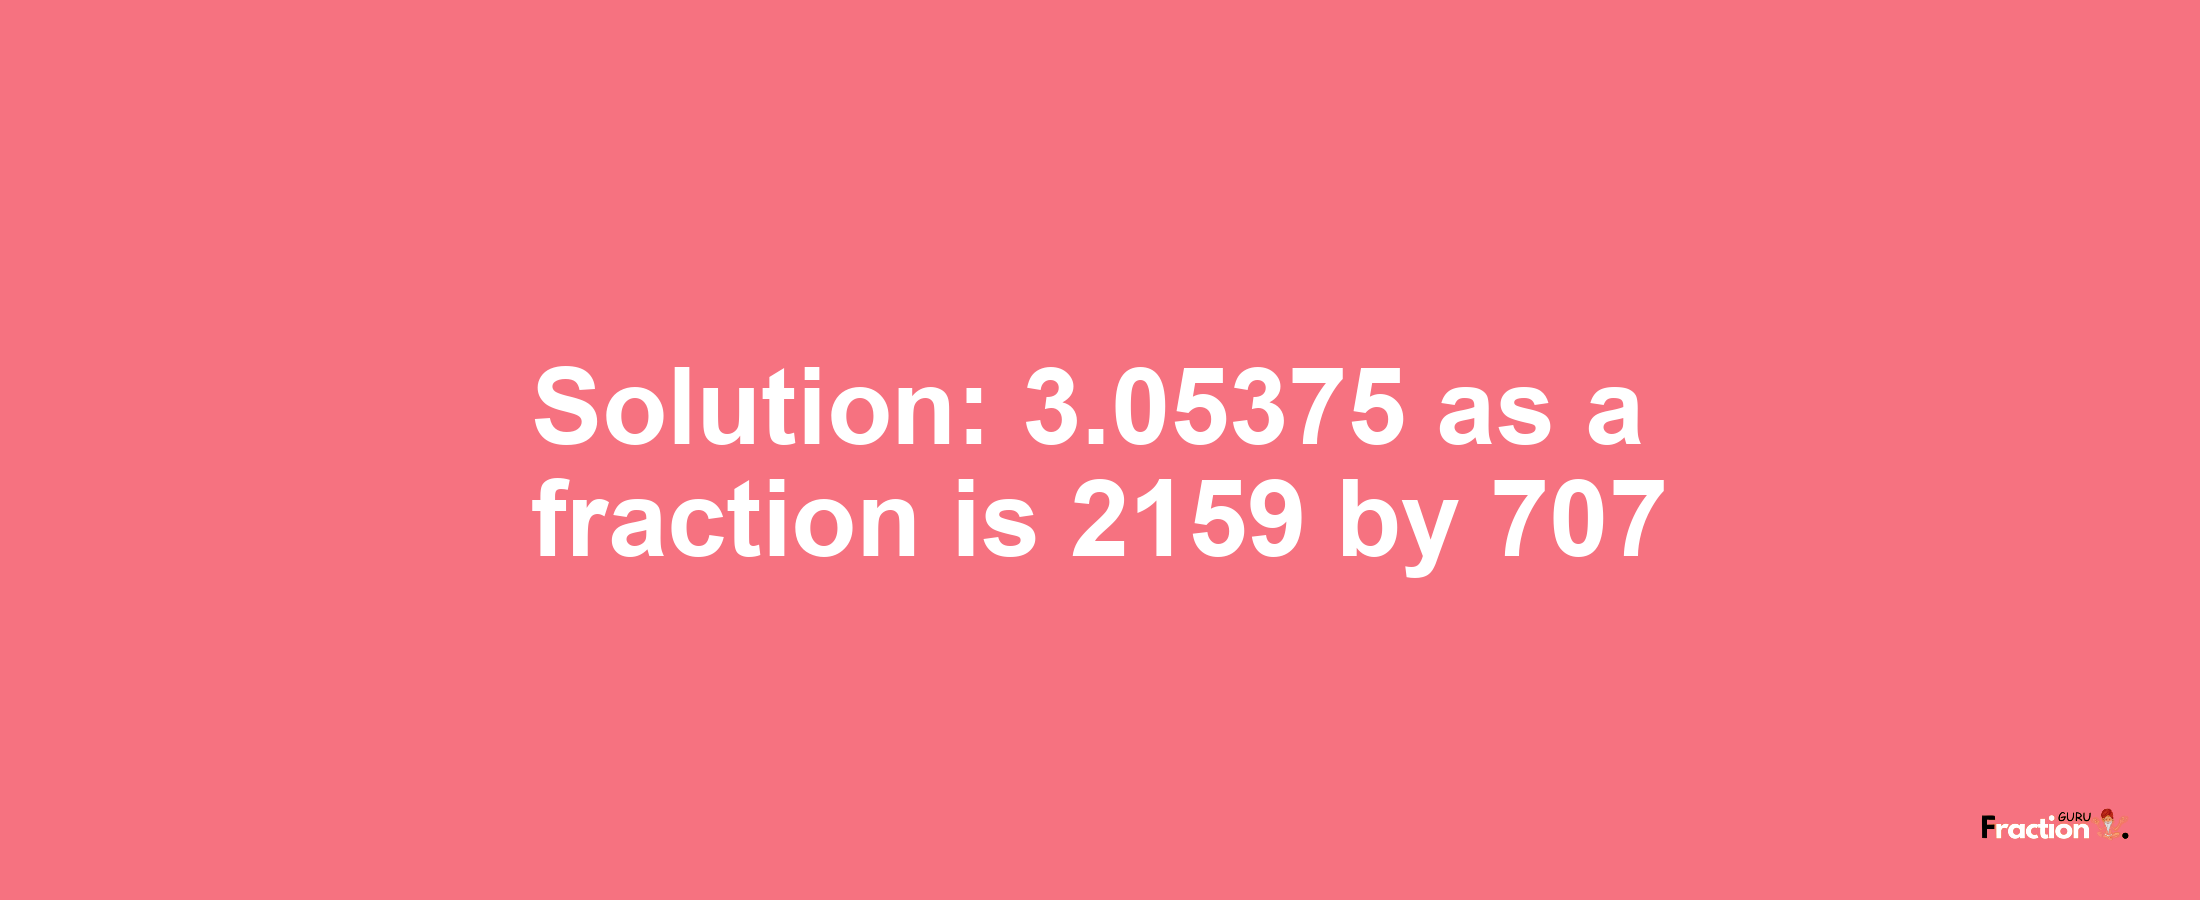 Solution:3.05375 as a fraction is 2159/707